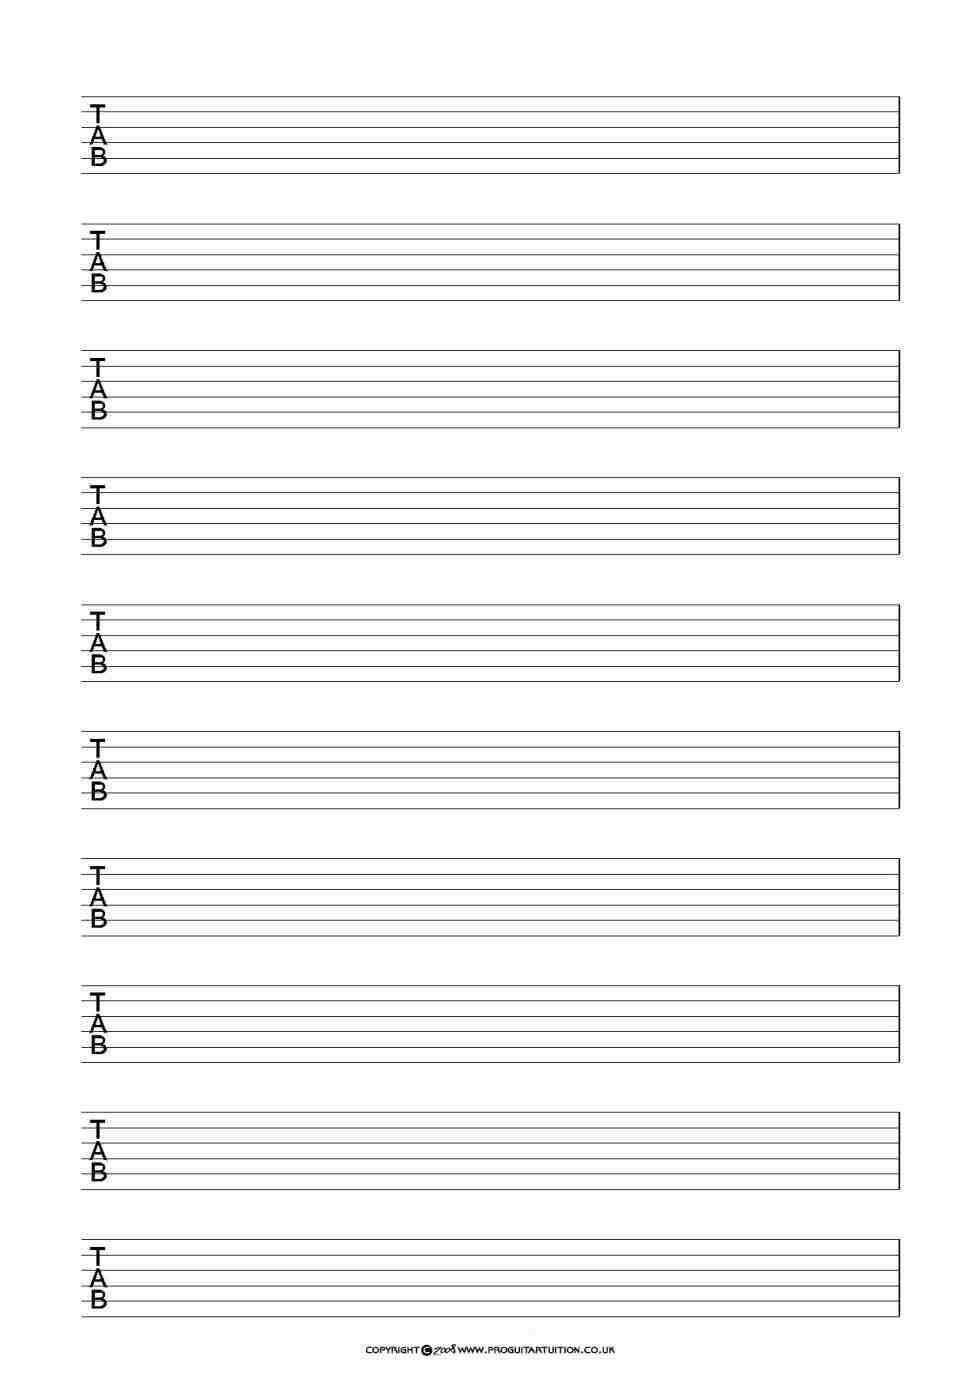 Spreadsheet Examples Sheet Music Ate Printable Guitar For With Regard To Blank Sheet Music Template For Word